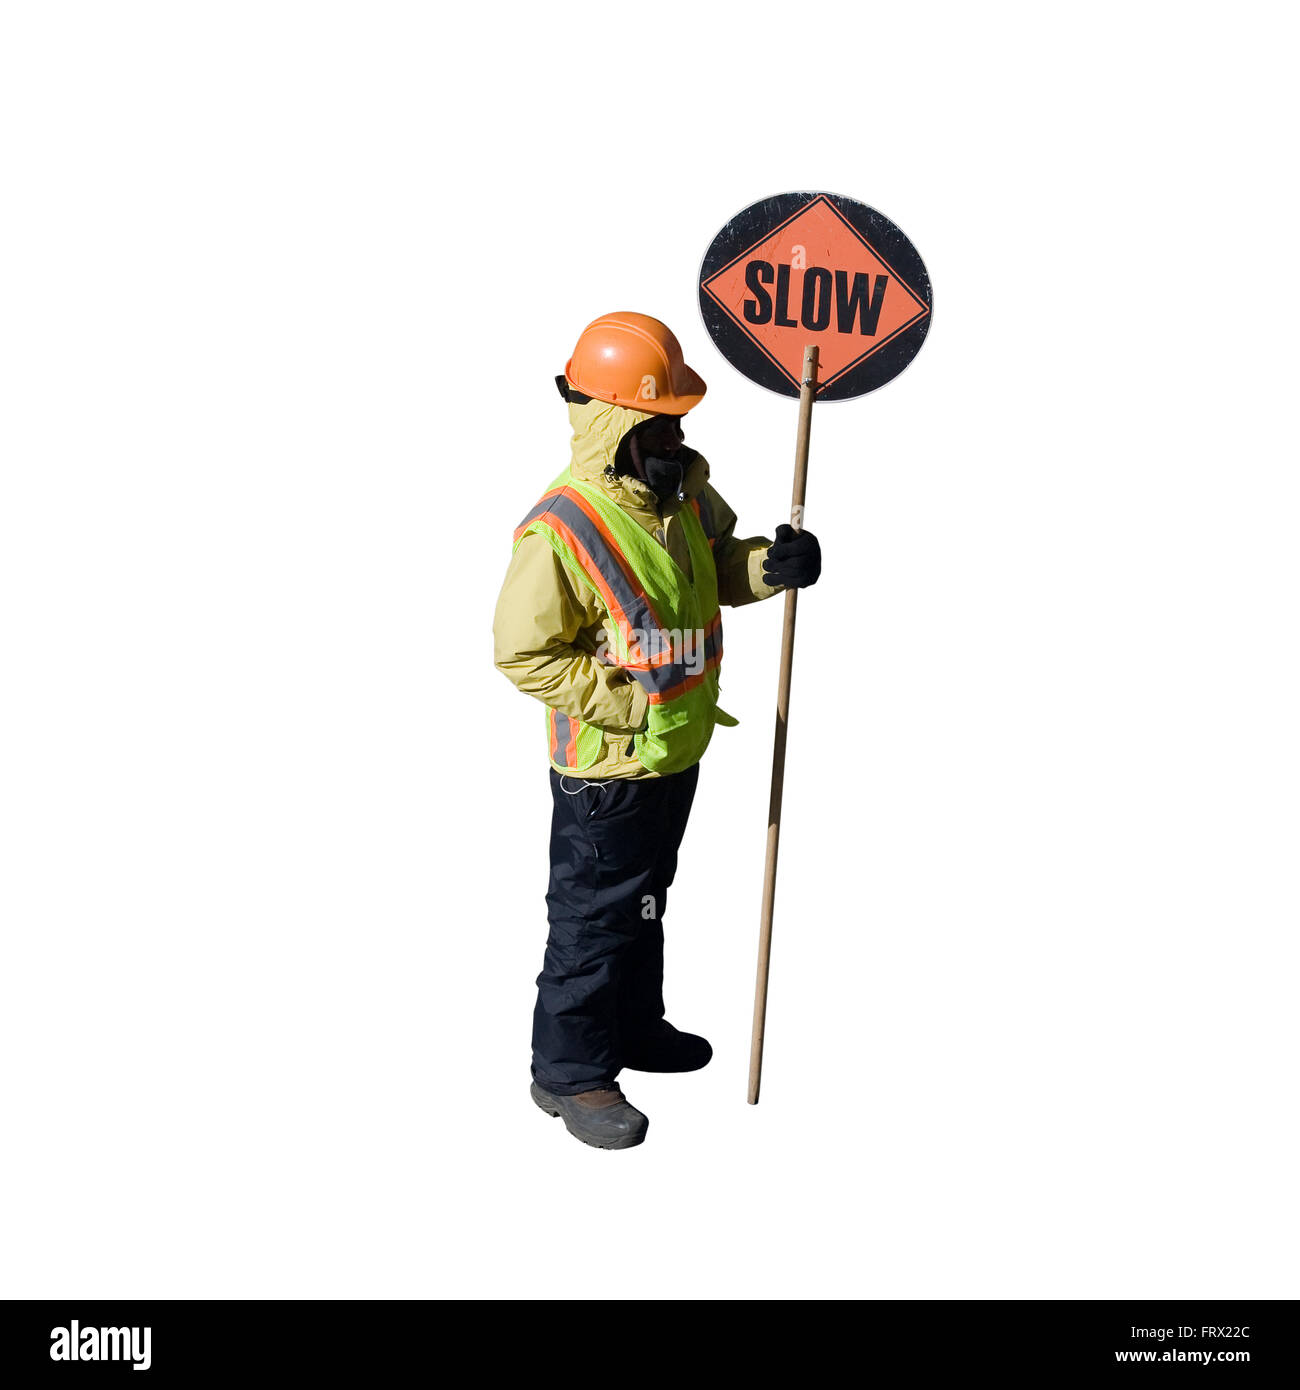 Cut Out Construction Worker with a hardhat and an orange reflective vest holds a round sign on a pole with SLOW printed on it Stock Photo